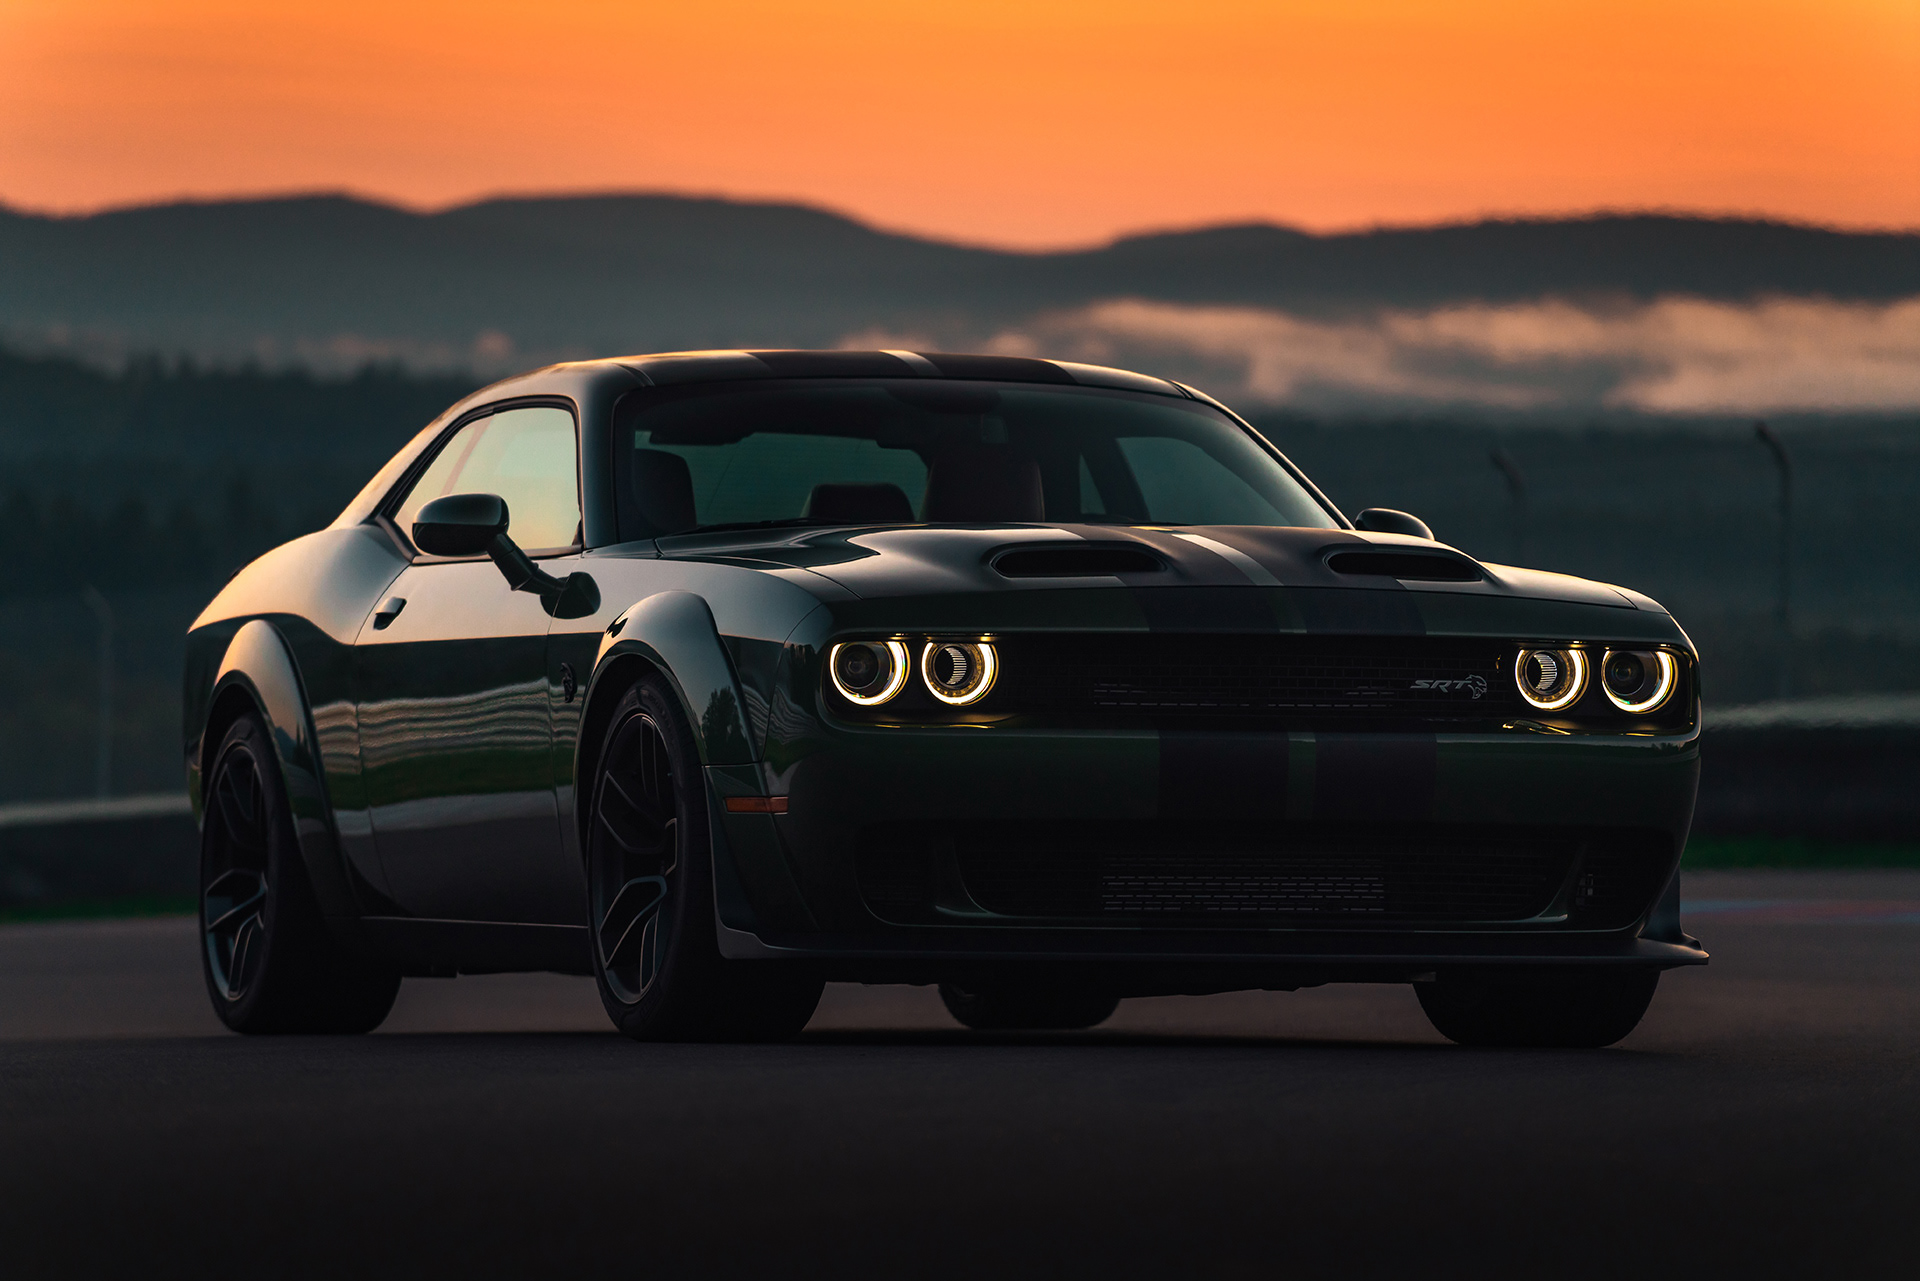 Dodge Challenger SRT Hellcat front angular view in the twilight